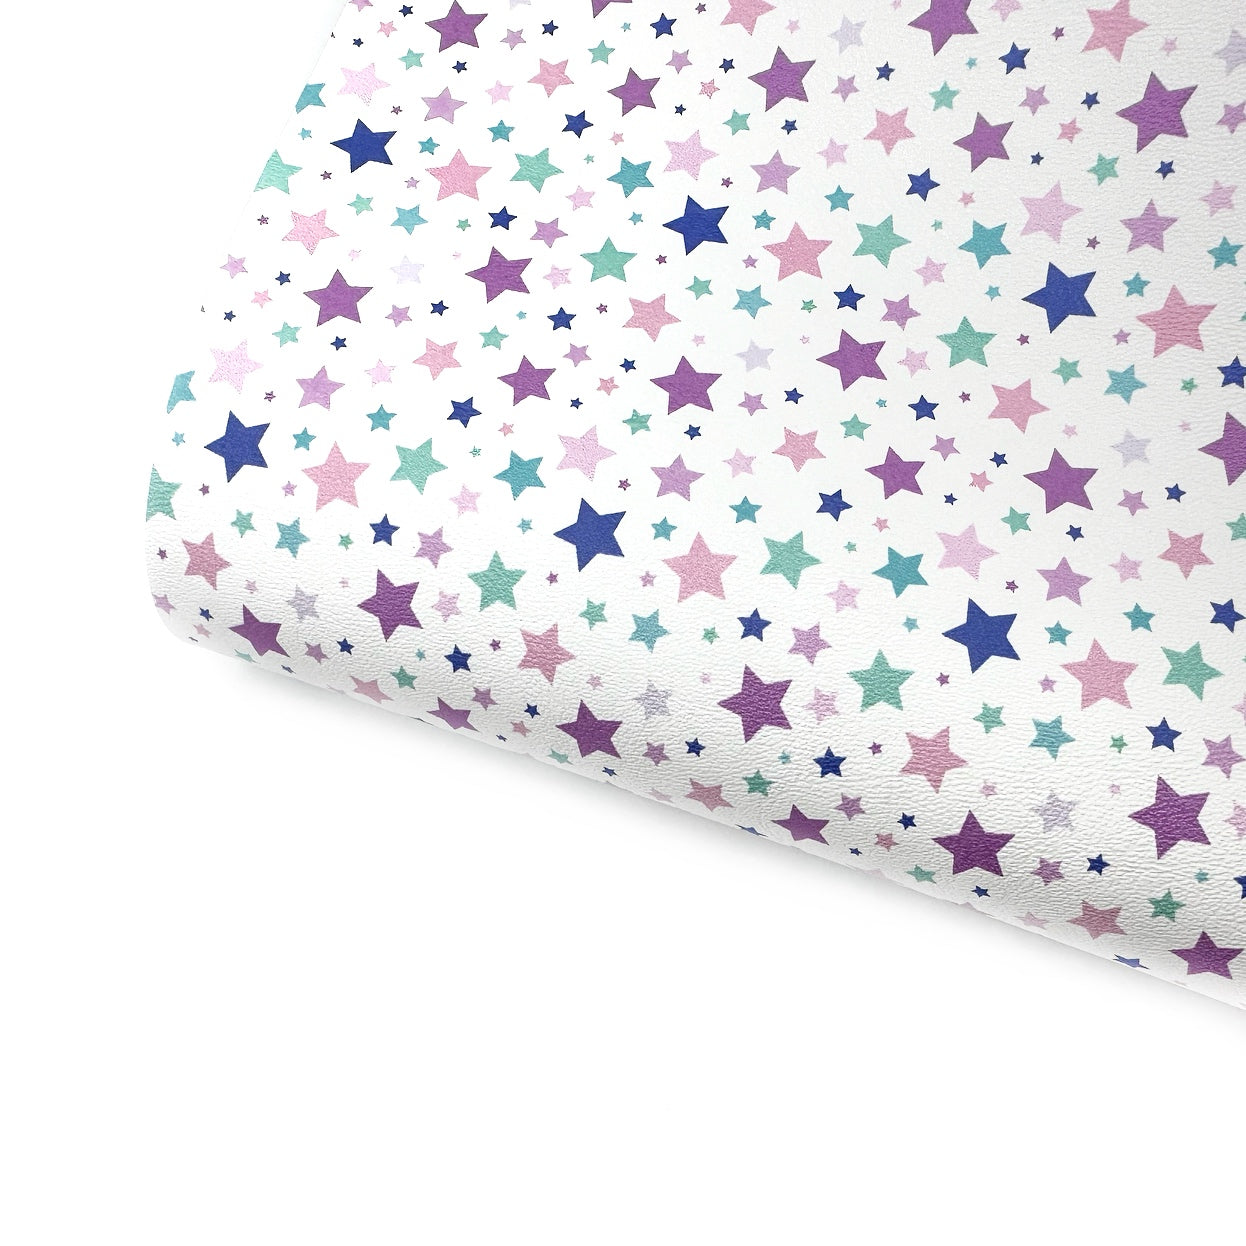 Magical Stars Premium Faux Leather Fabric Sheets